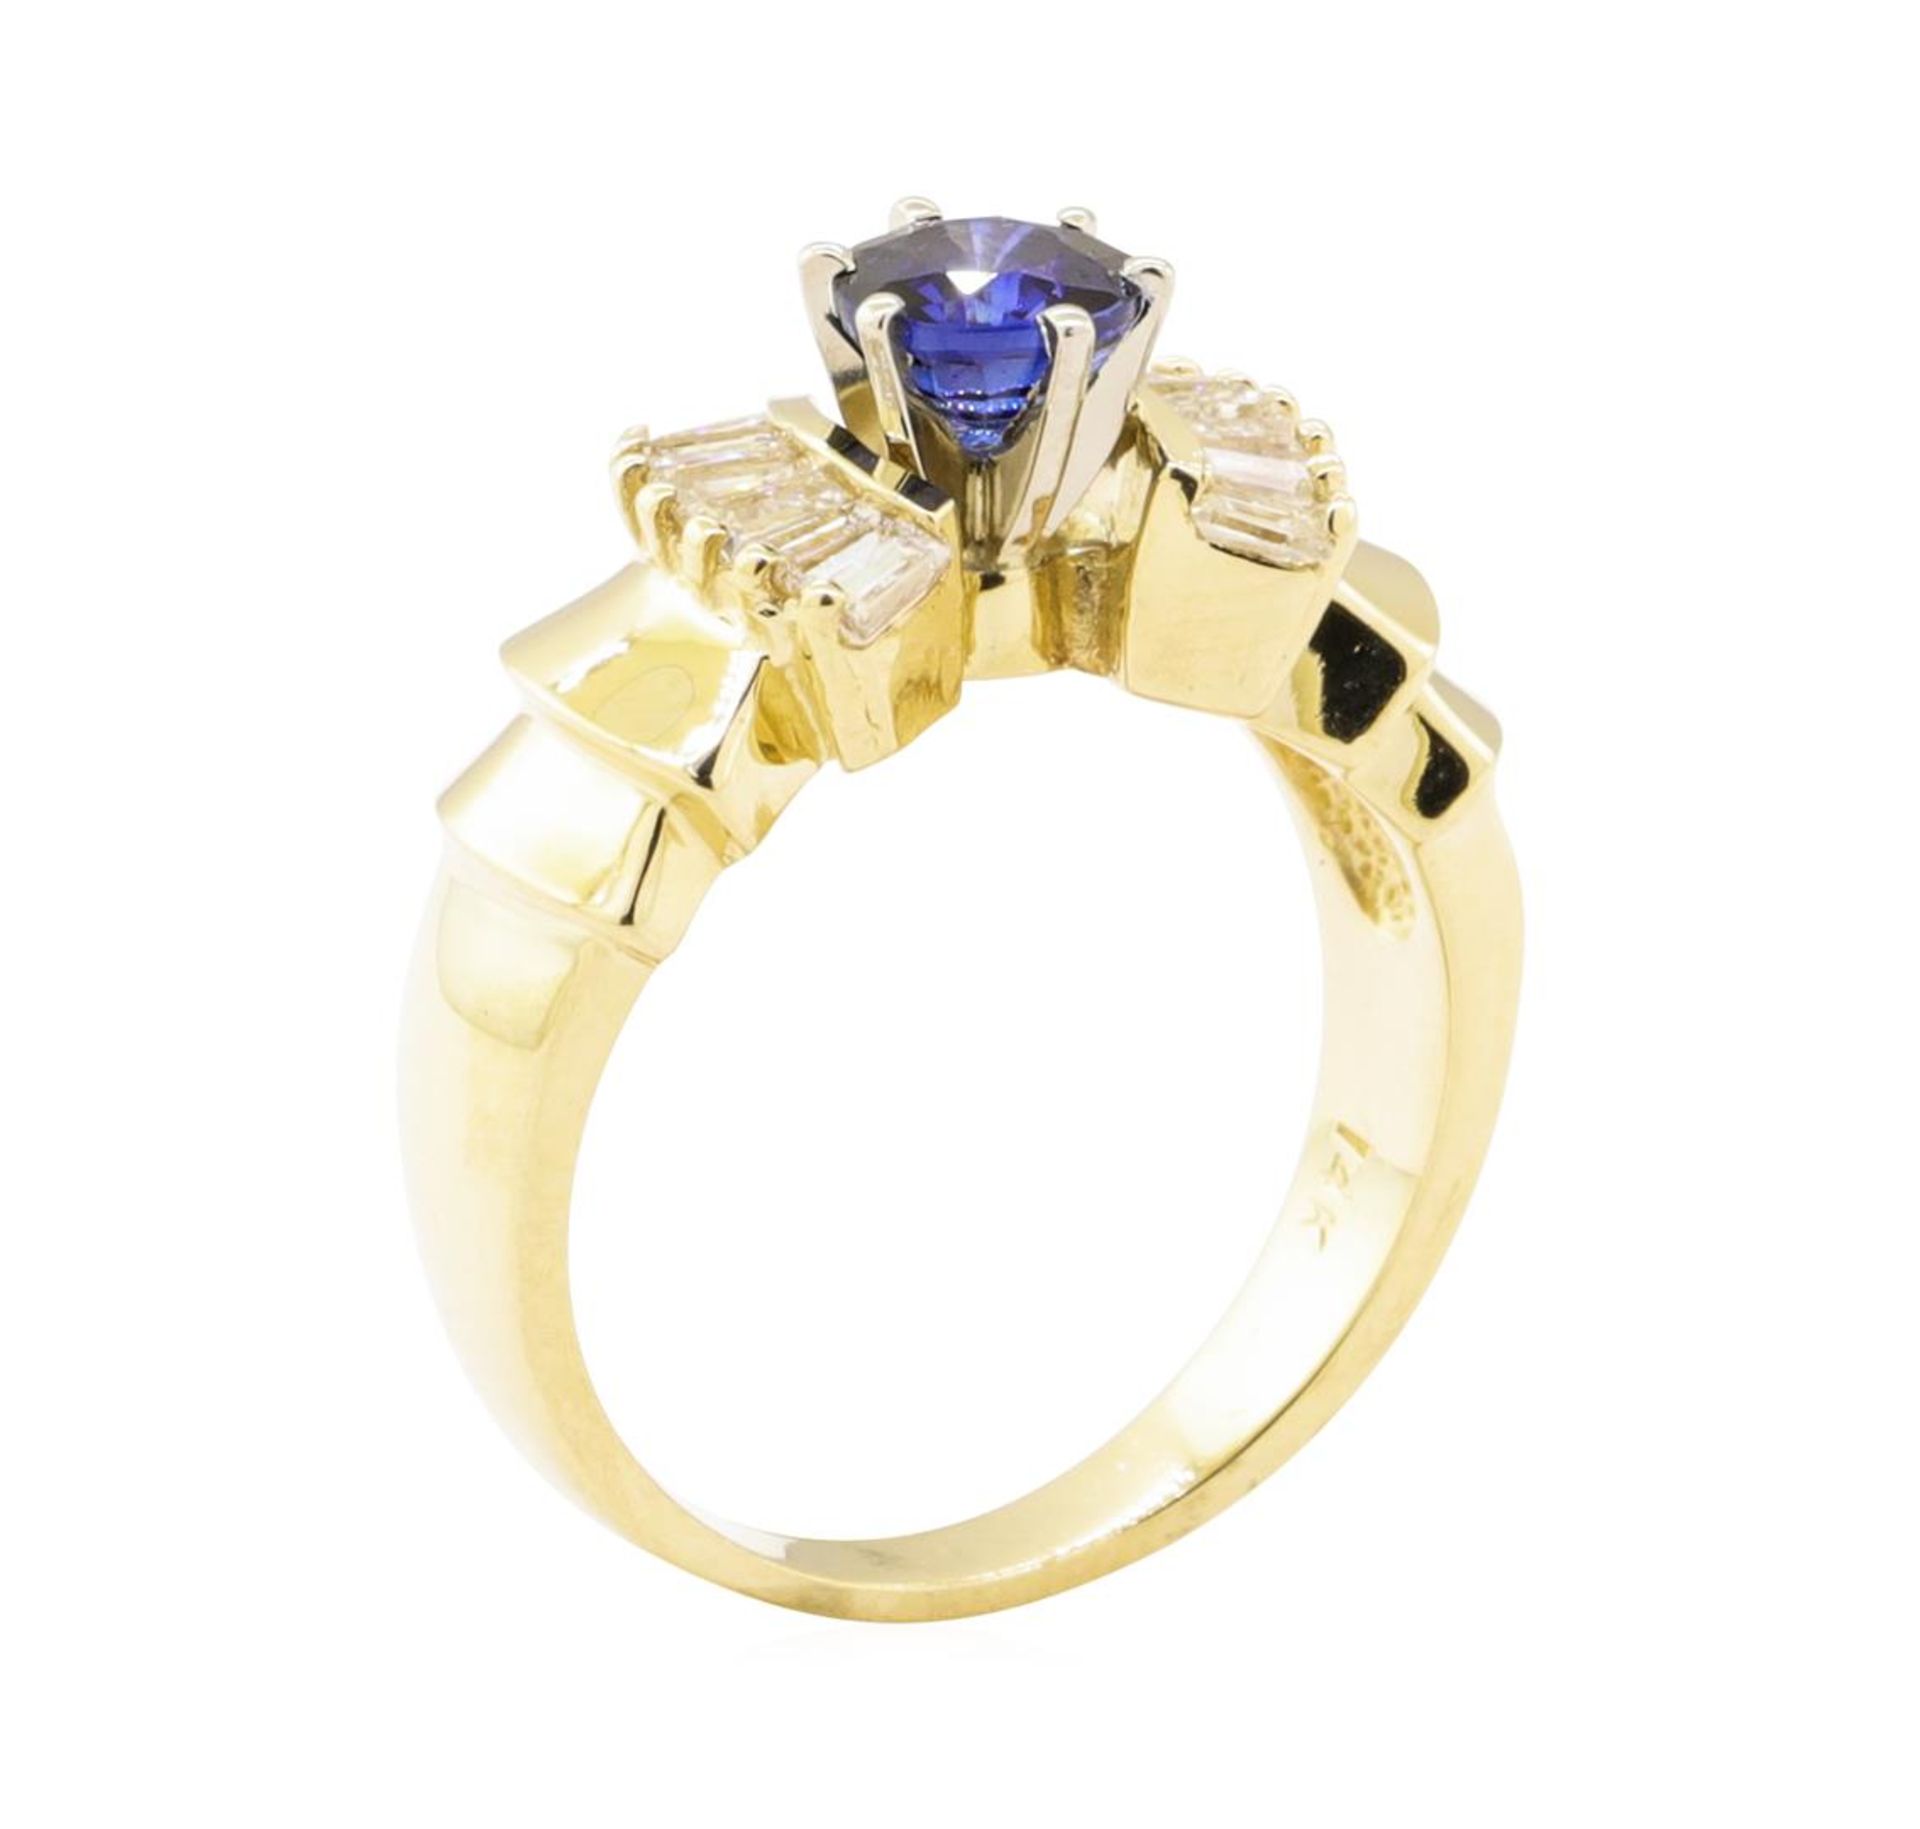 1.47 ctw Blue Sapphire And Diamond Ring - 14KT Yellow Gold - Image 4 of 5